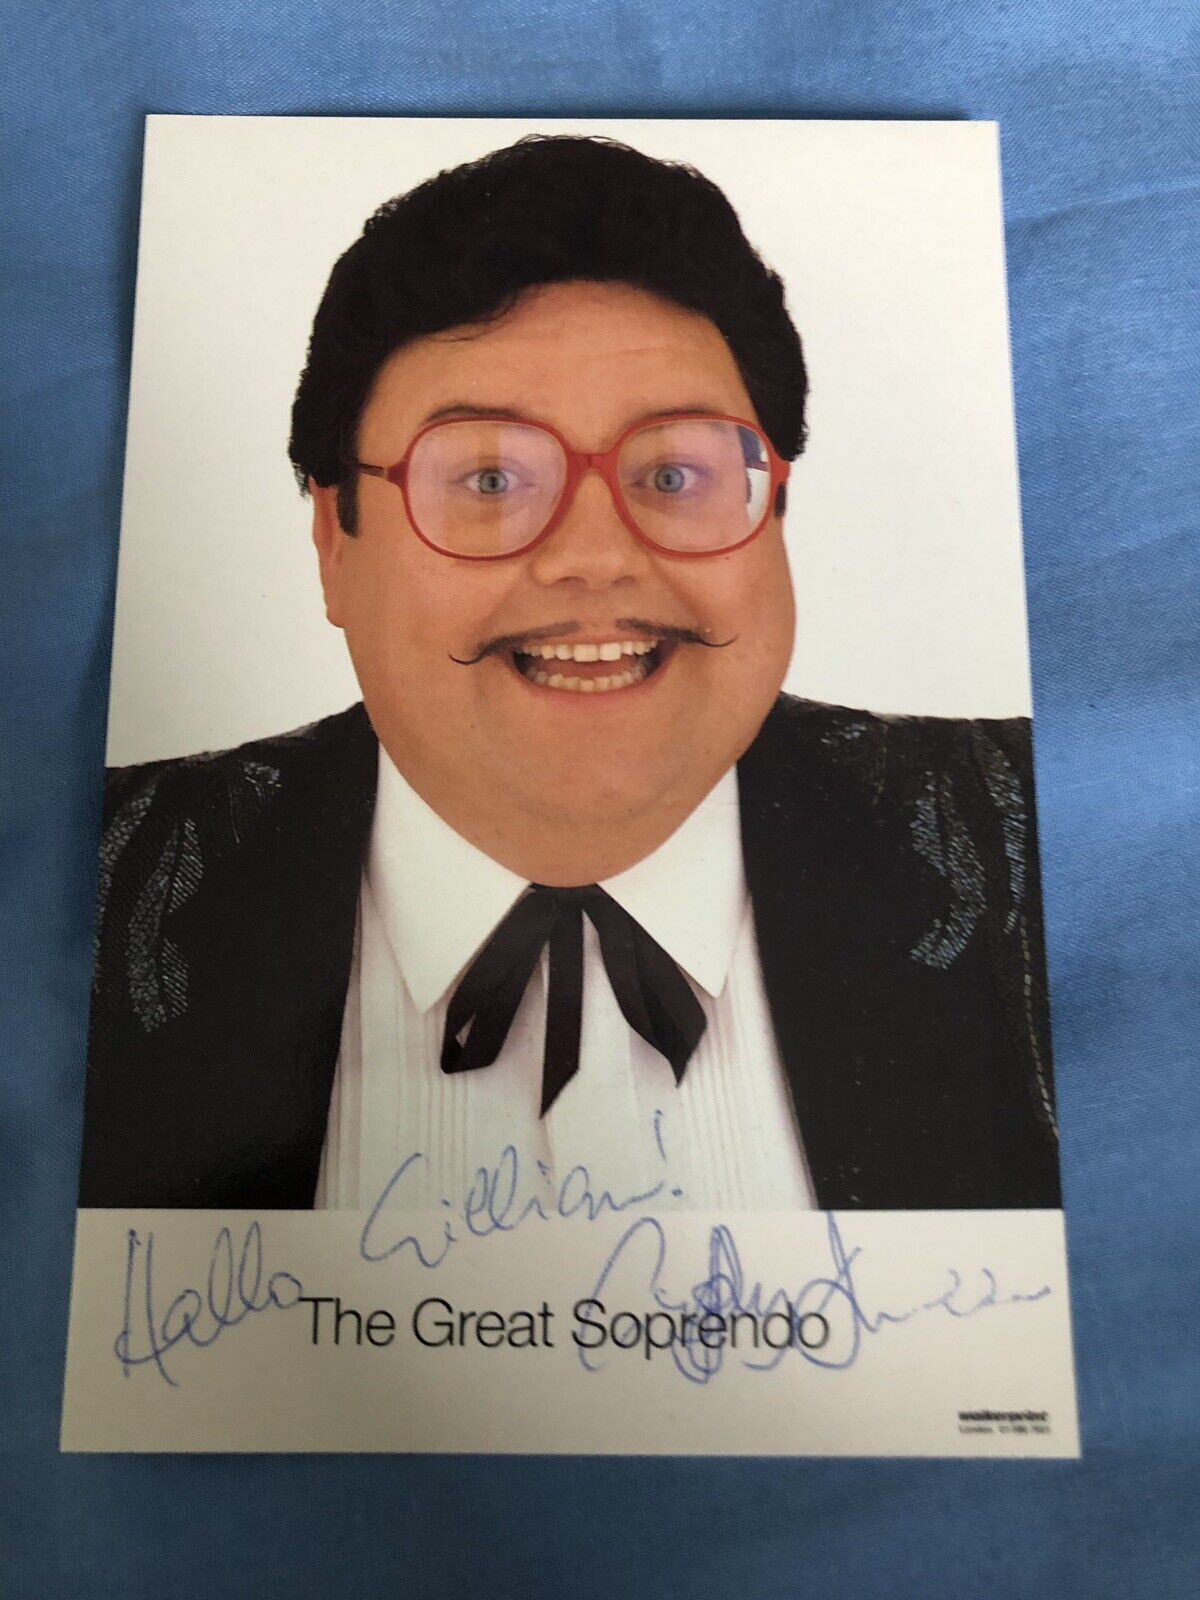 THE GREAT SOPRENDO- GEOFFREY DURHAM (COMEDY MAGICIAN) SIGNED Photo Poster painting